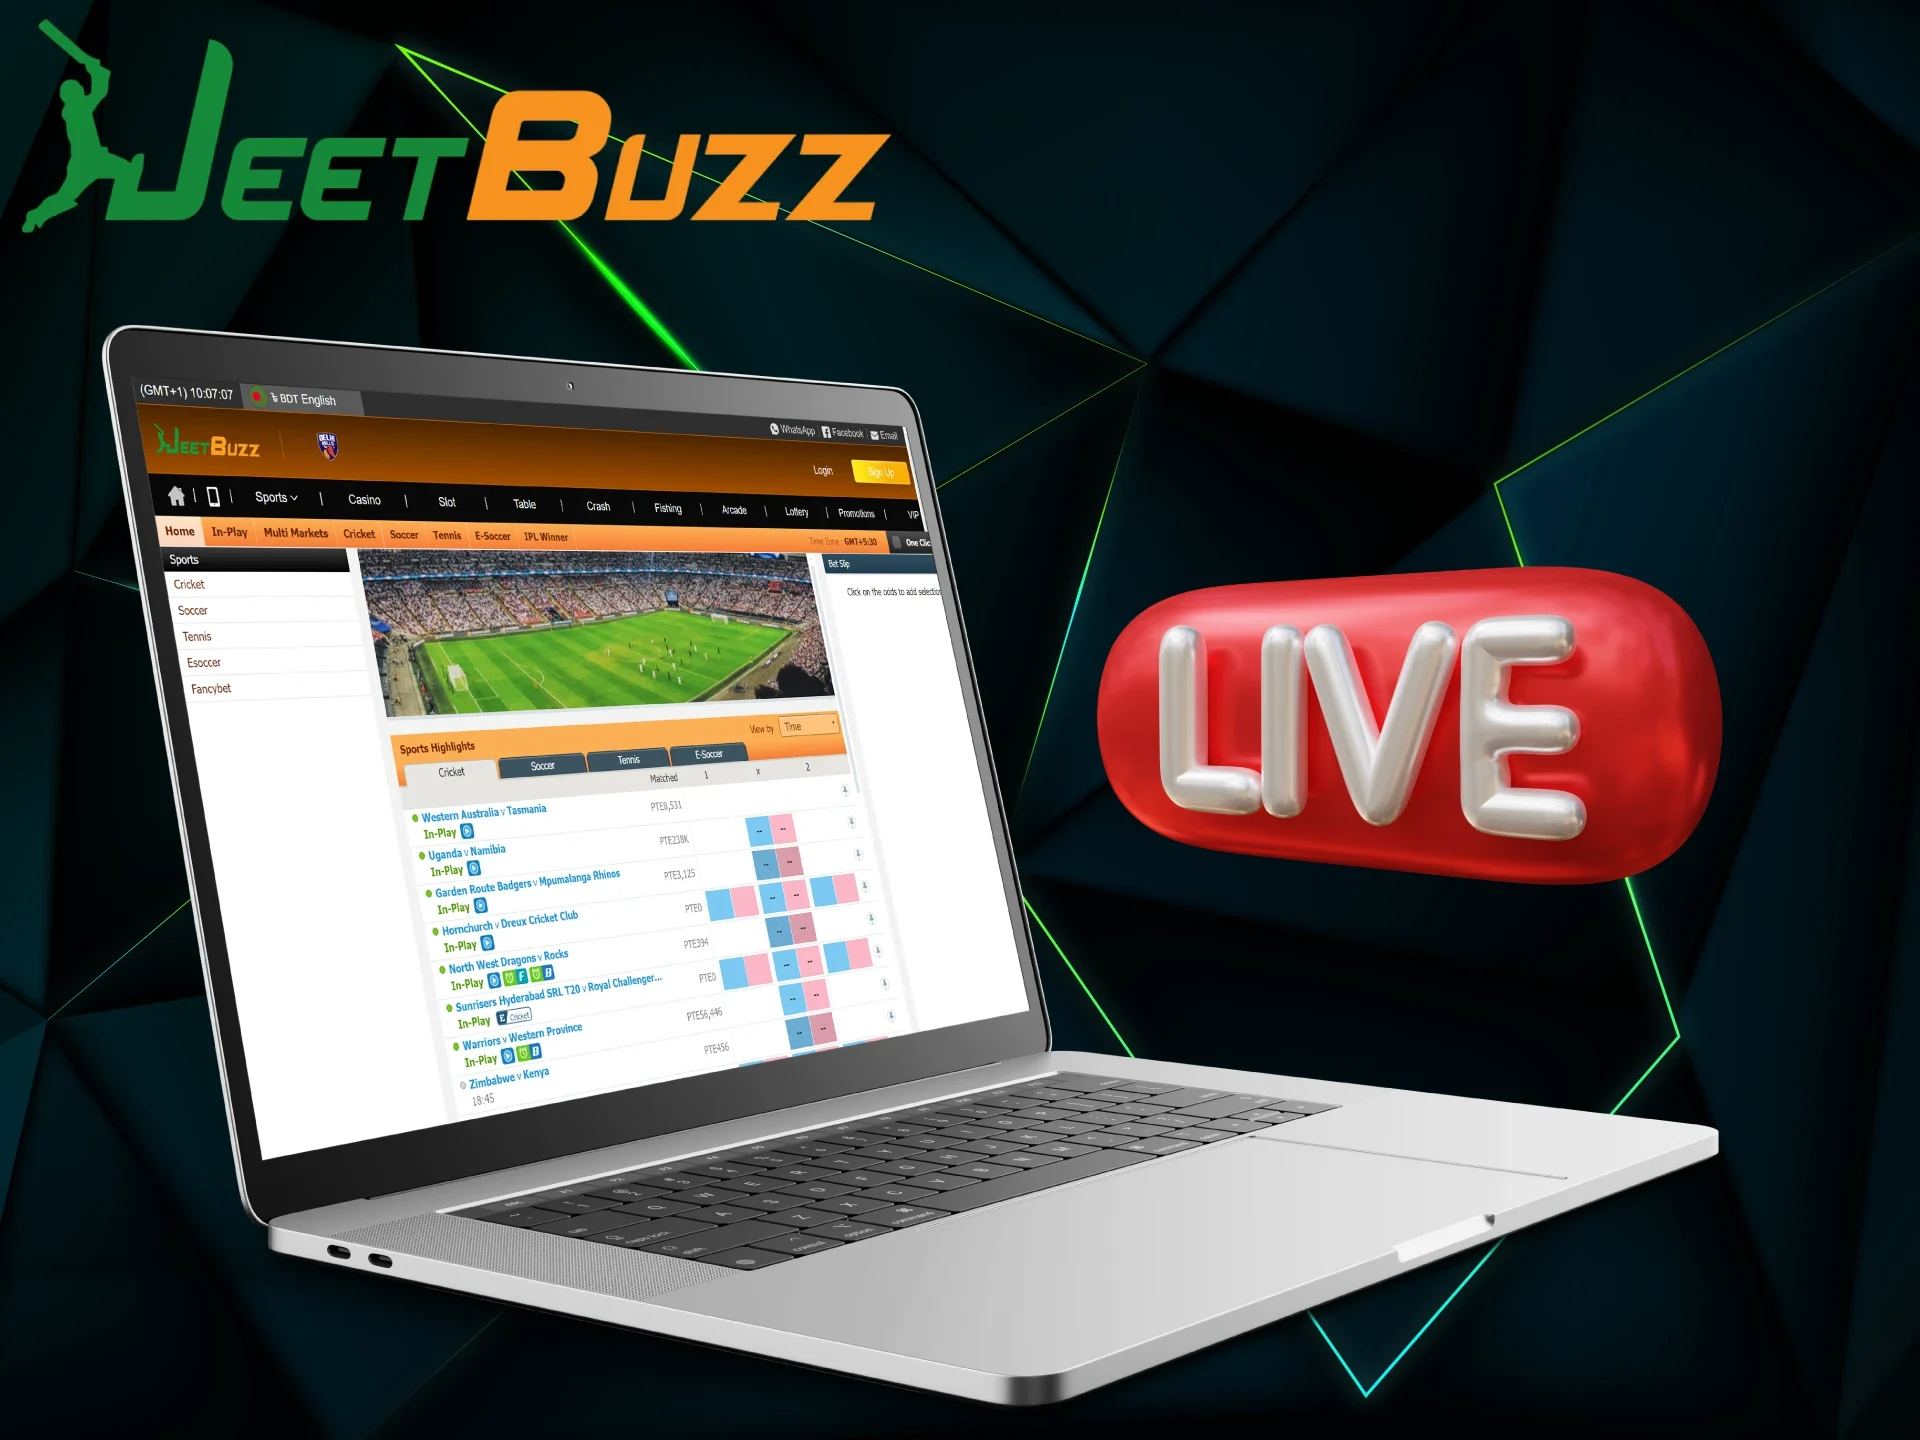 JeetBuzz offers live cricket matches and access to full results and match statistics.